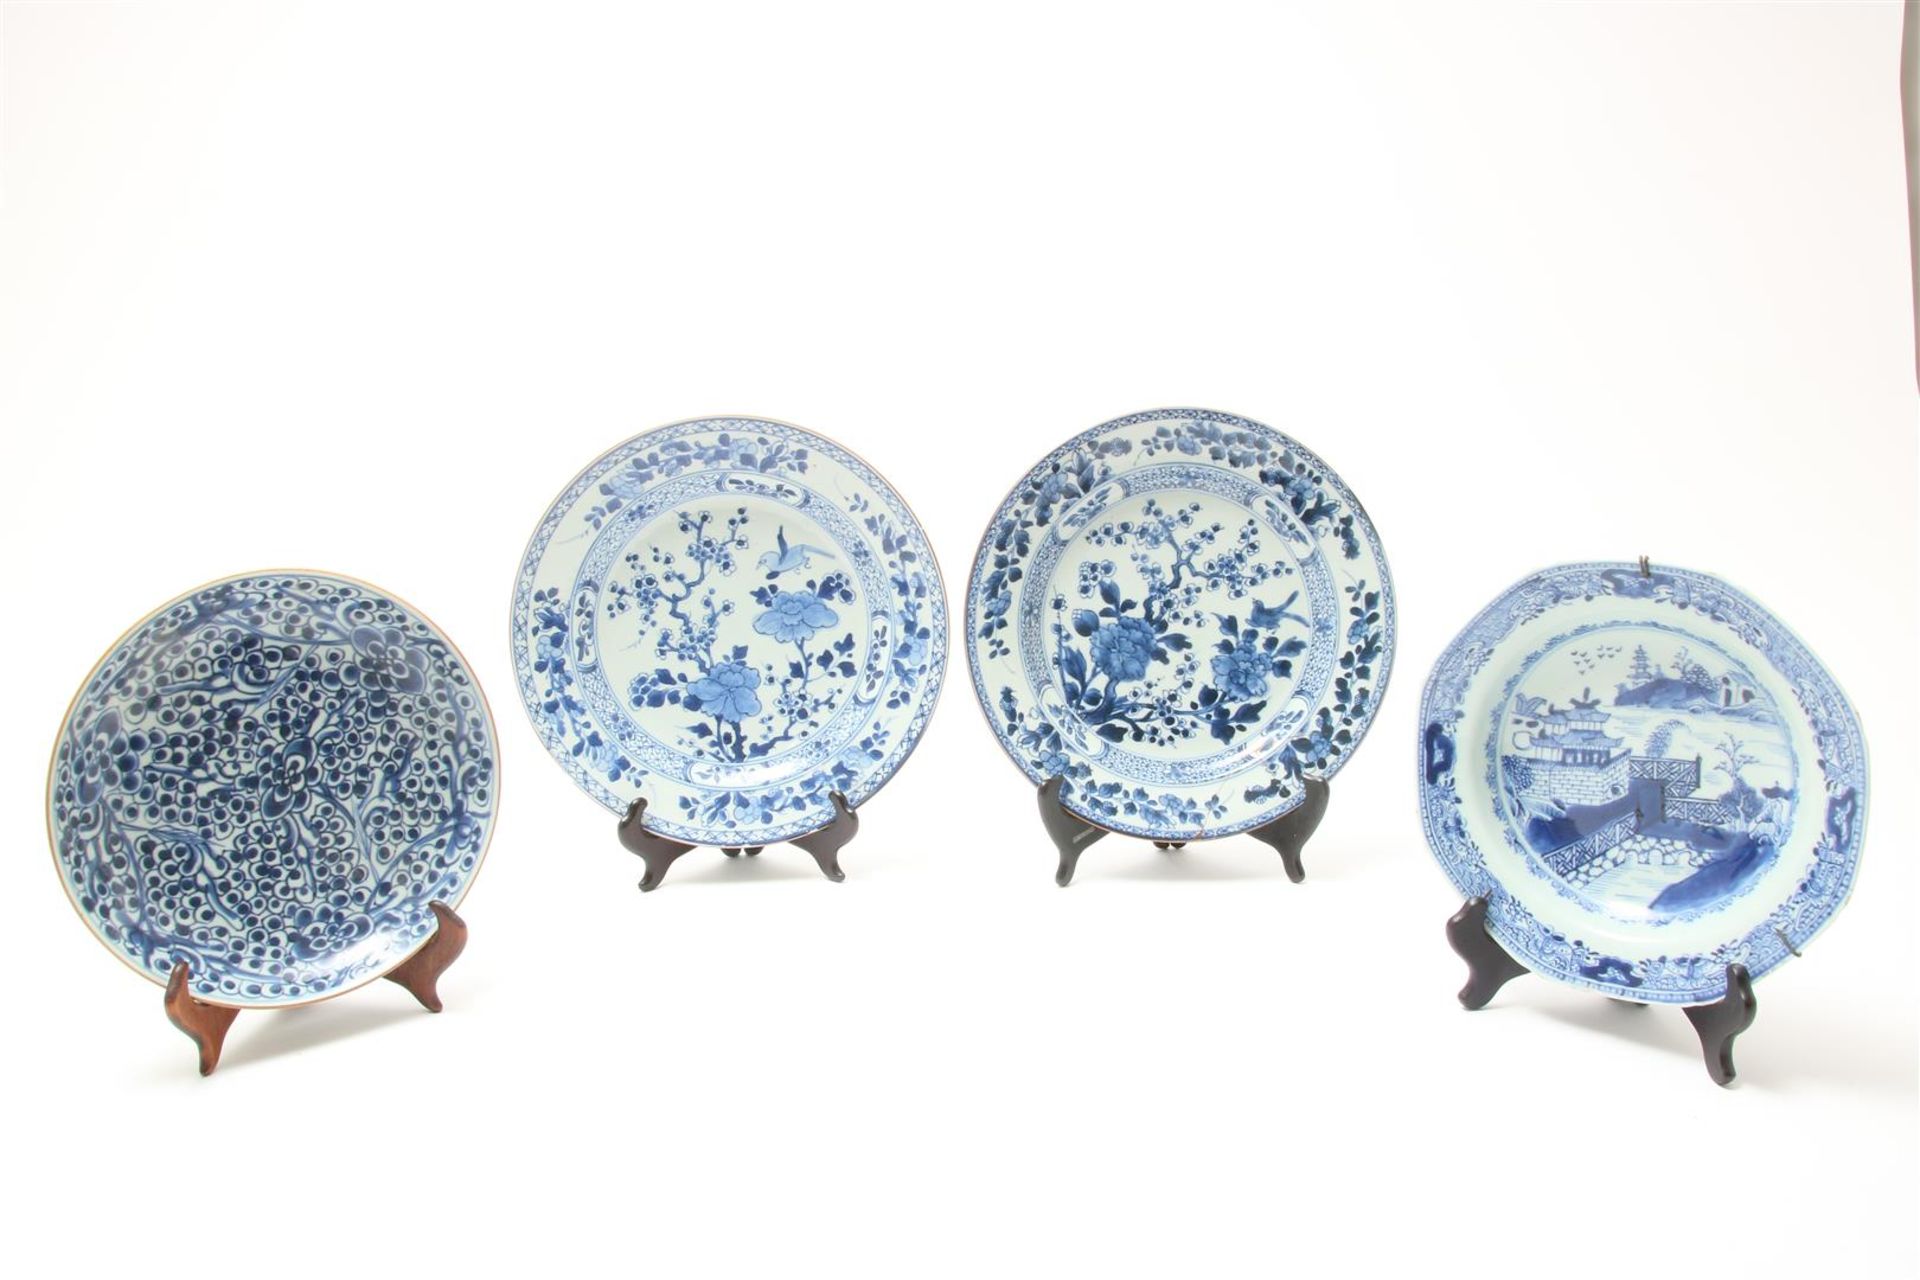 Set of porcelain Qianlong plates with a bird near flowering shrubs and a blossom branch, - Image 10 of 12